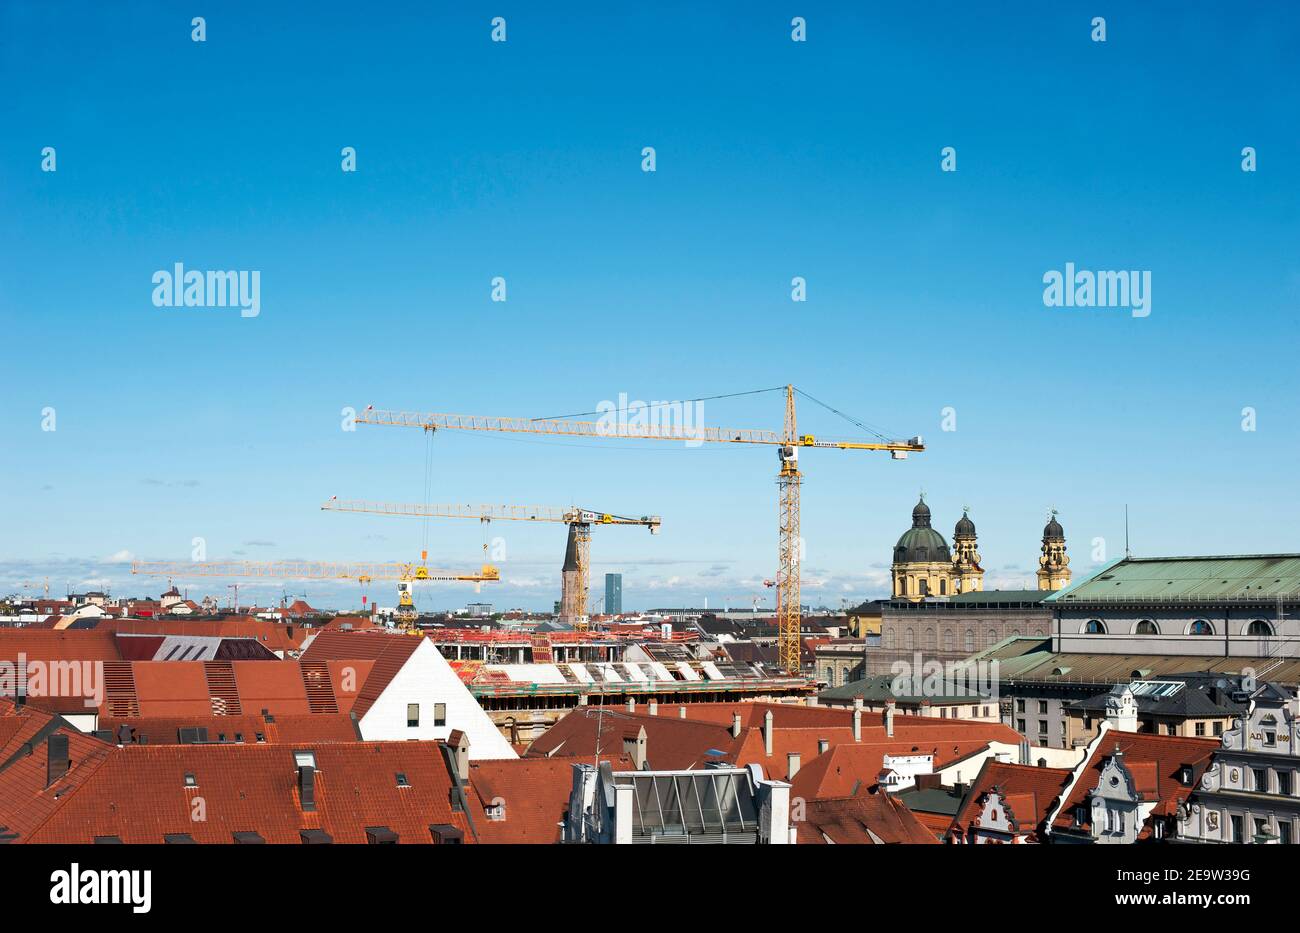 Munich - Germany, September 13, 2019: View over the roofs of Munich city center. Stock Photo